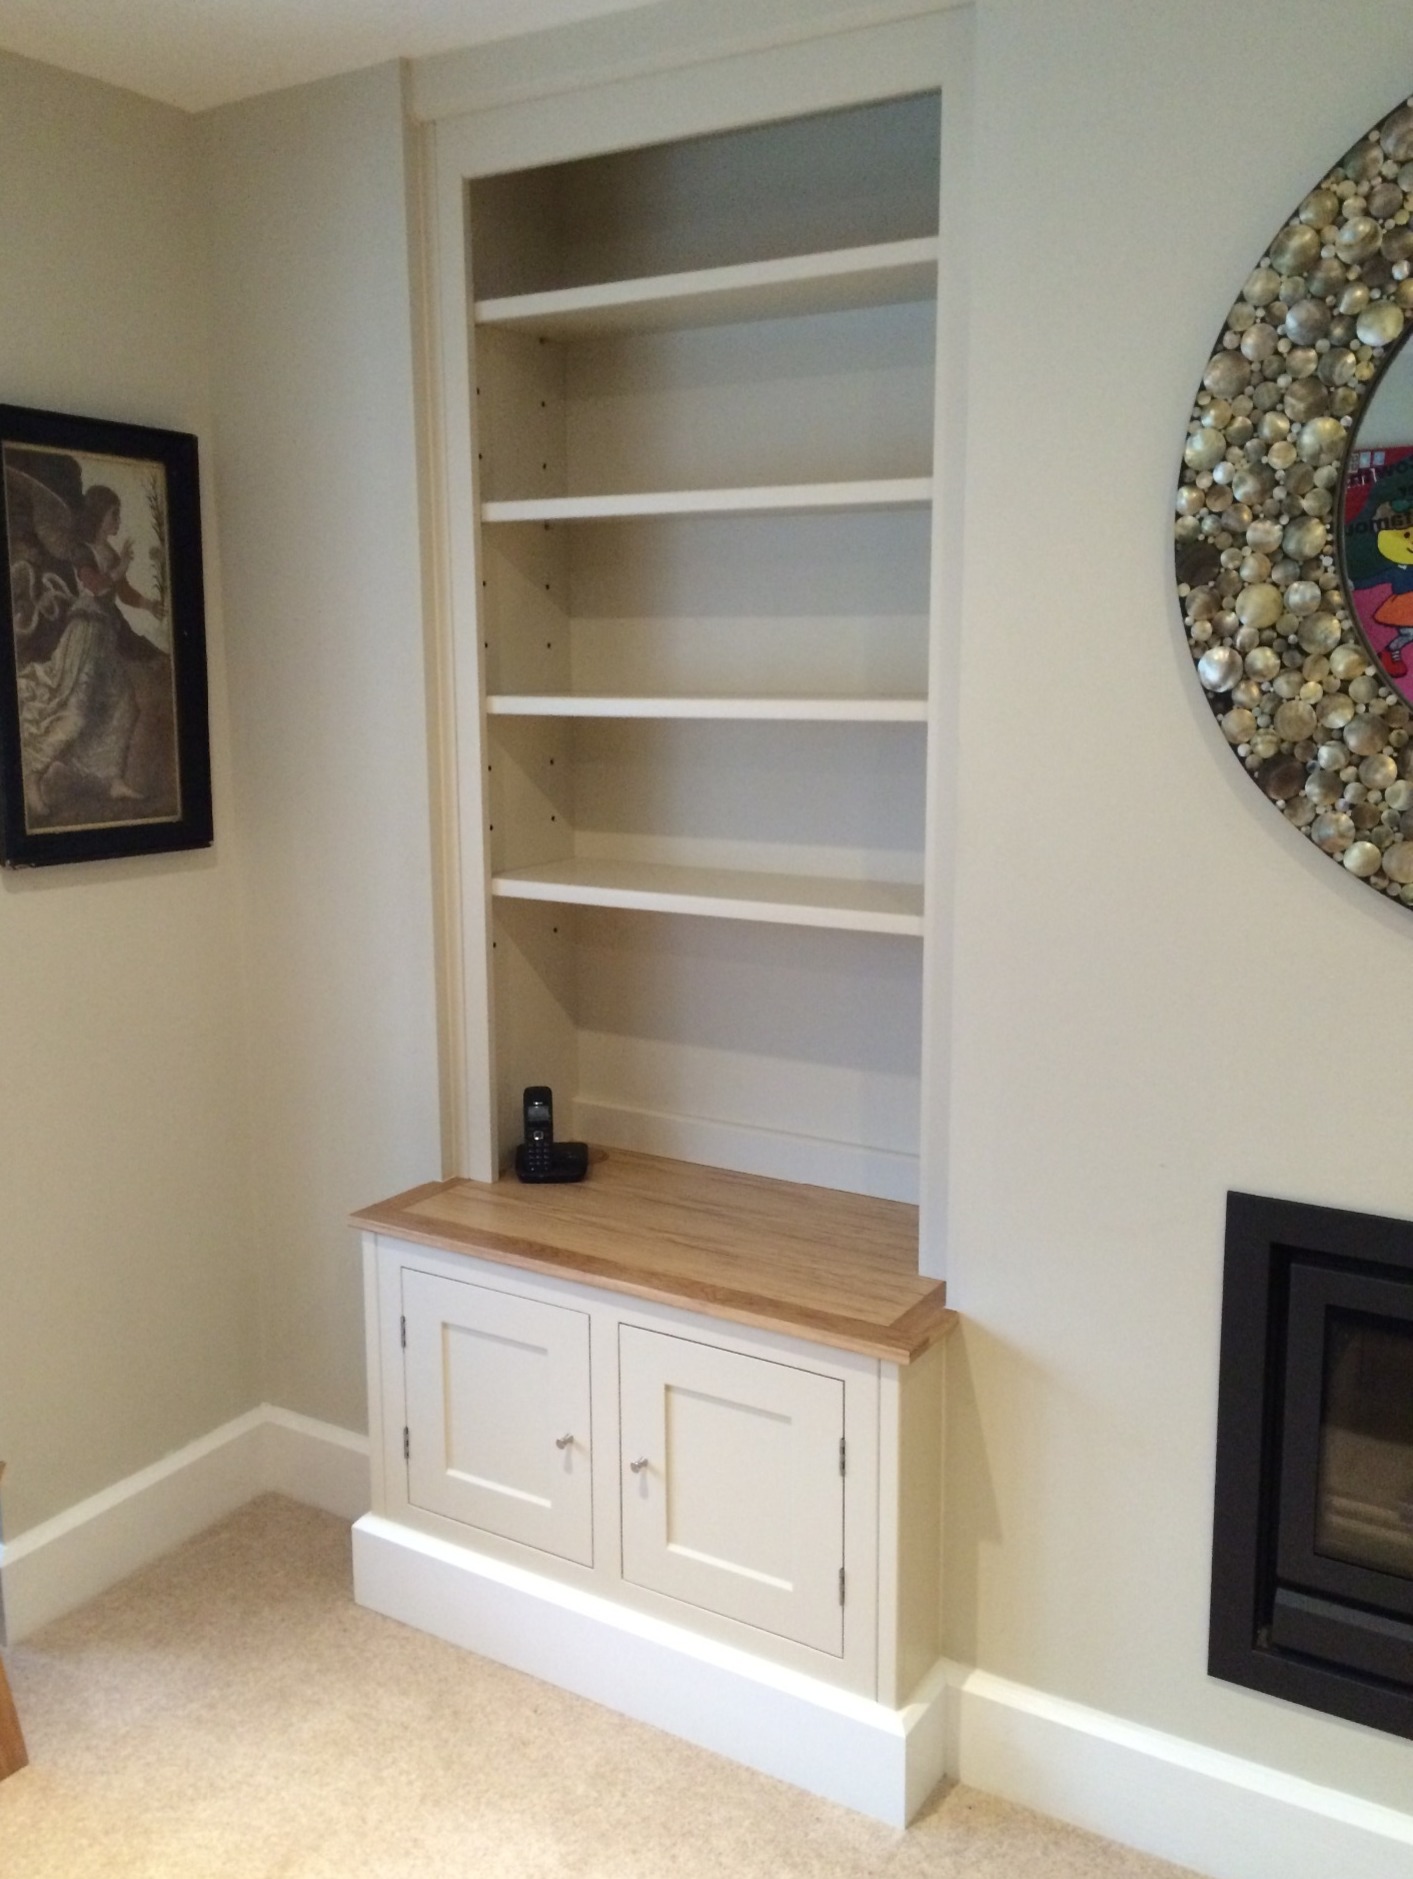 Built-alcove shelving and cupboard